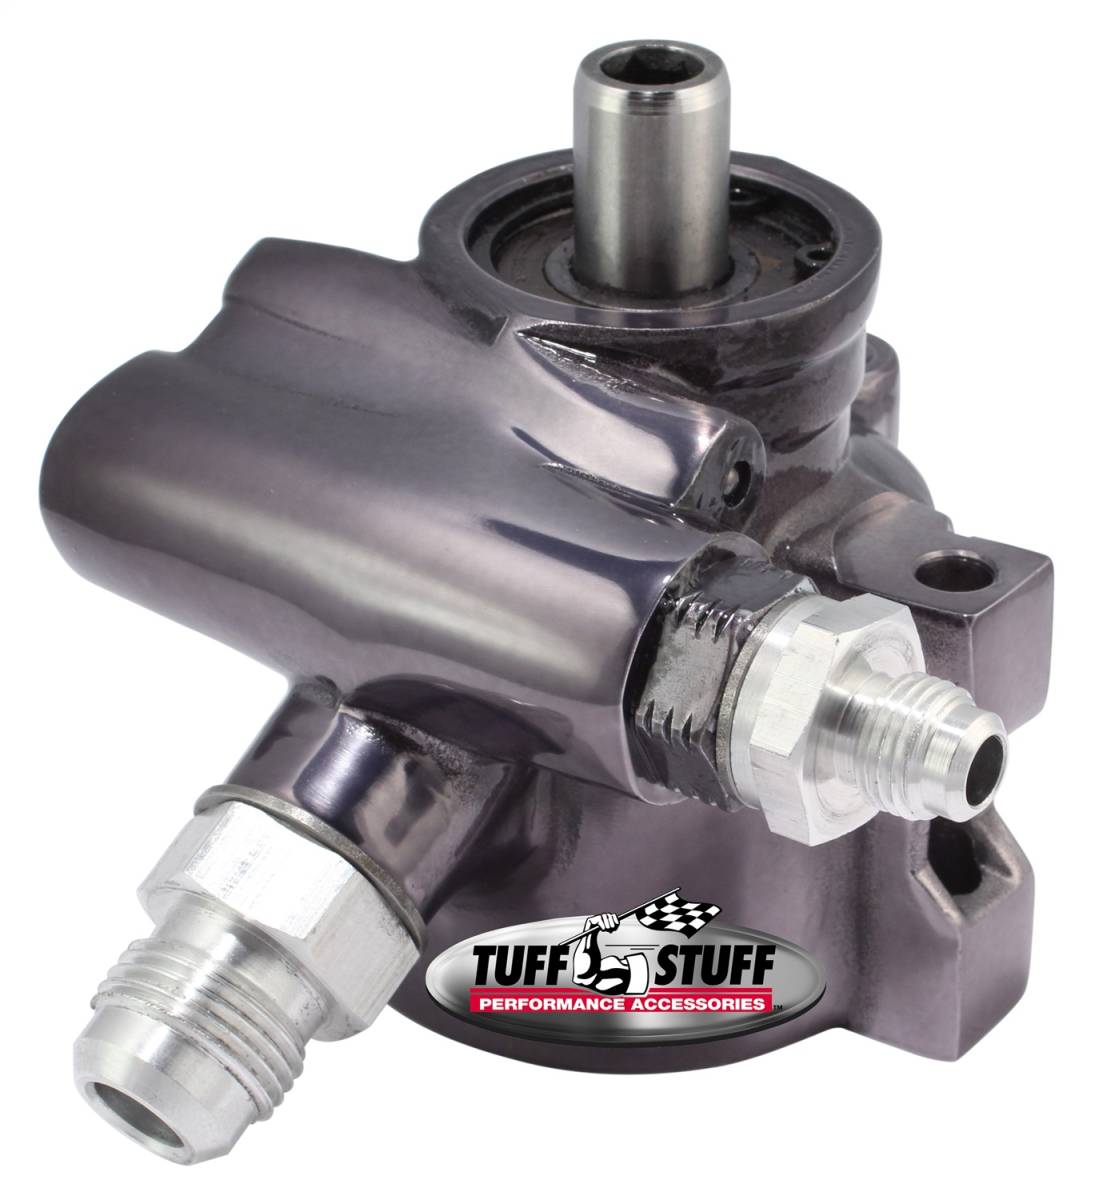 Tuff Stuff Performance - Type II Alum. Power Steering Pump AN-6 And AN-10 Fitting 8mm Through Hole Mounting Aluminum For Street Rods/Custom Vehicles w/Limited Engine Space Black Chrome 6175ALP77